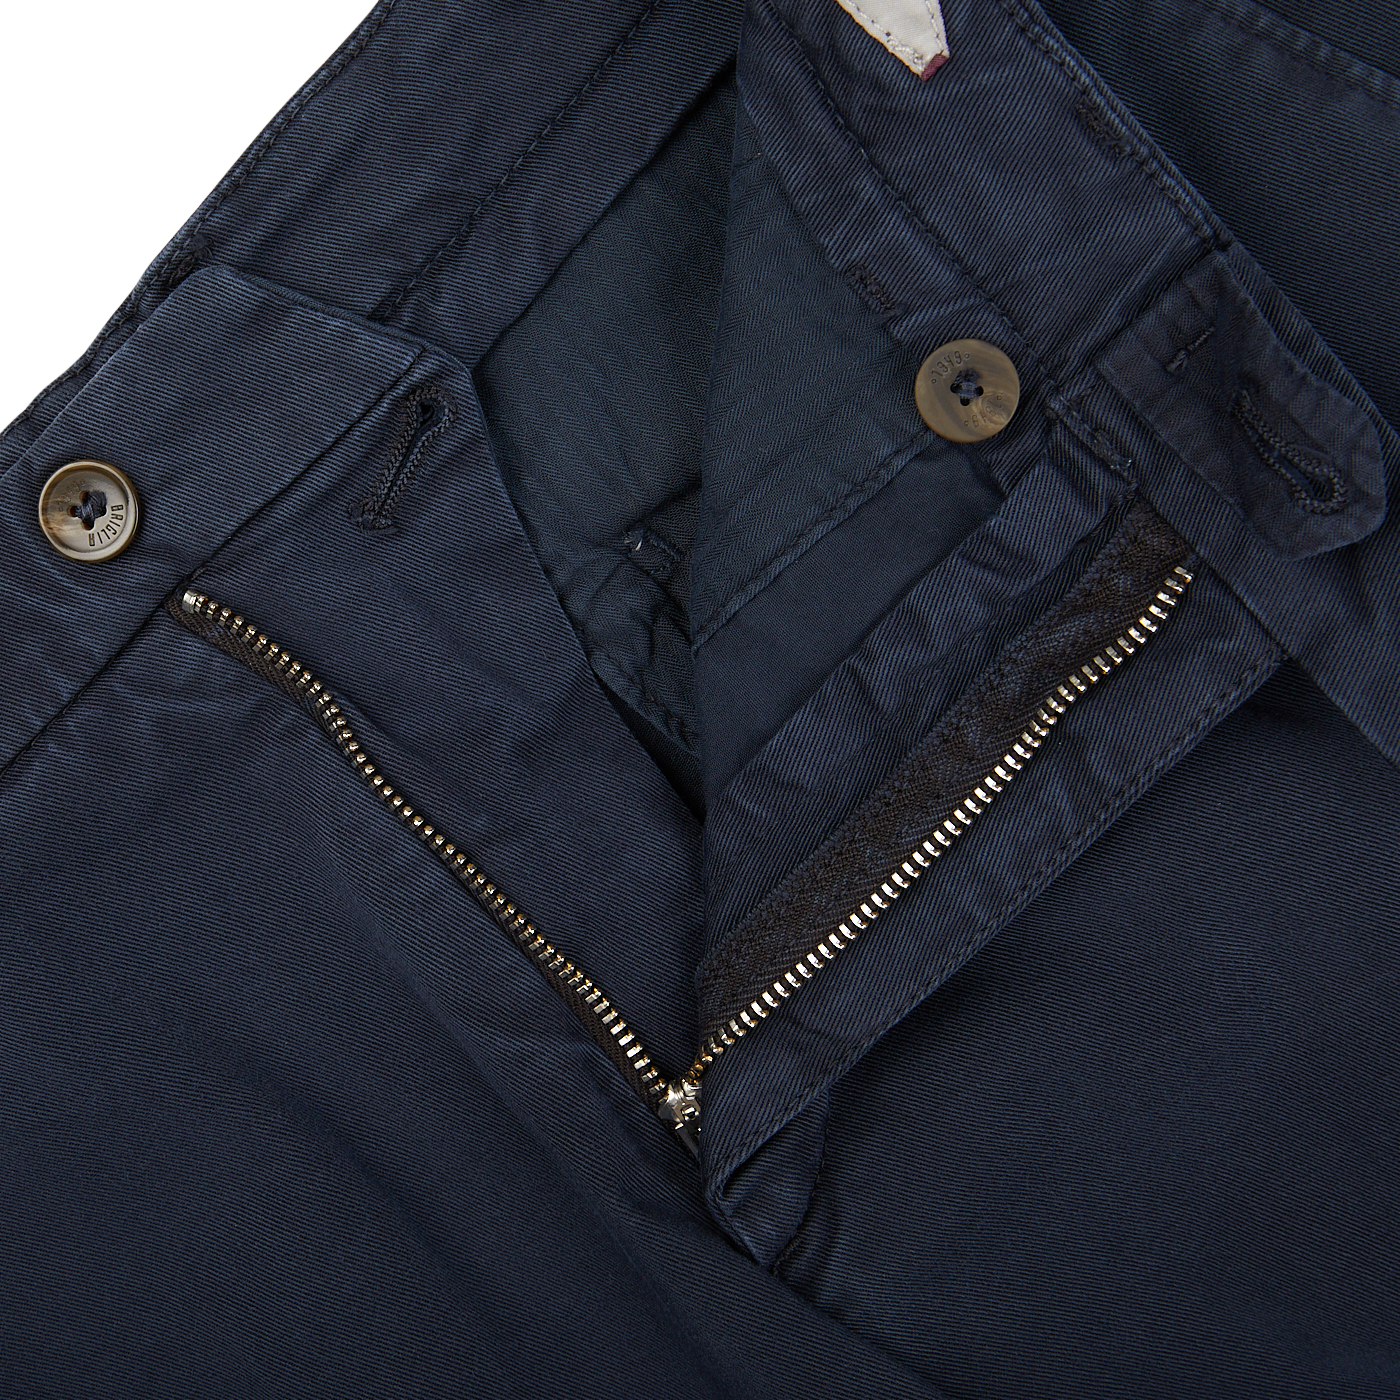 A close up of a pair of Briglia Navy Blue Cotton Stretch BG62 Casual Chinos with zippers.